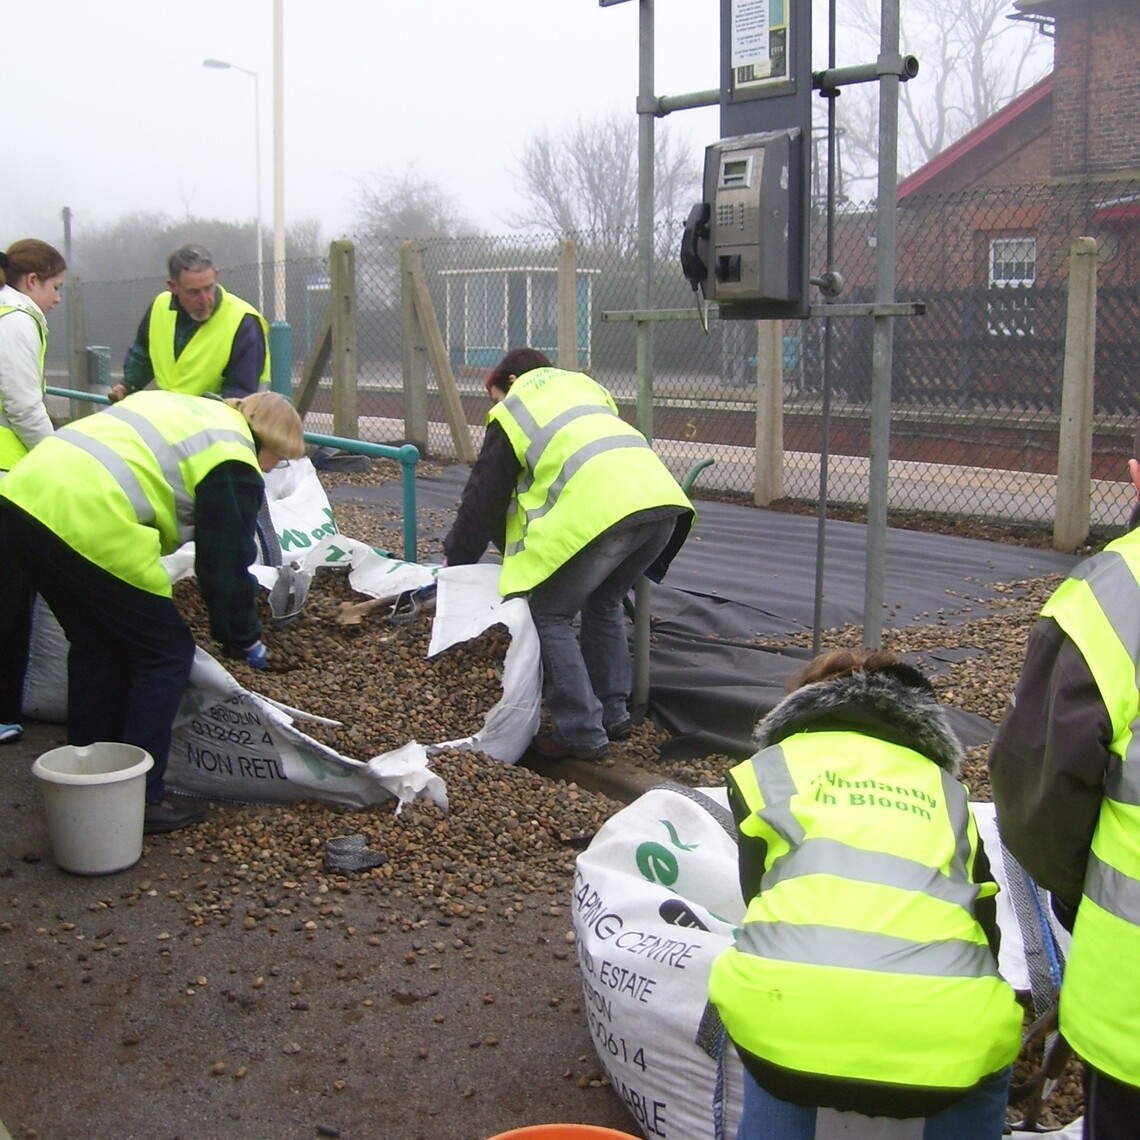 Emptying bags of gravel for the new beach bed, Hunmanby Railway Station